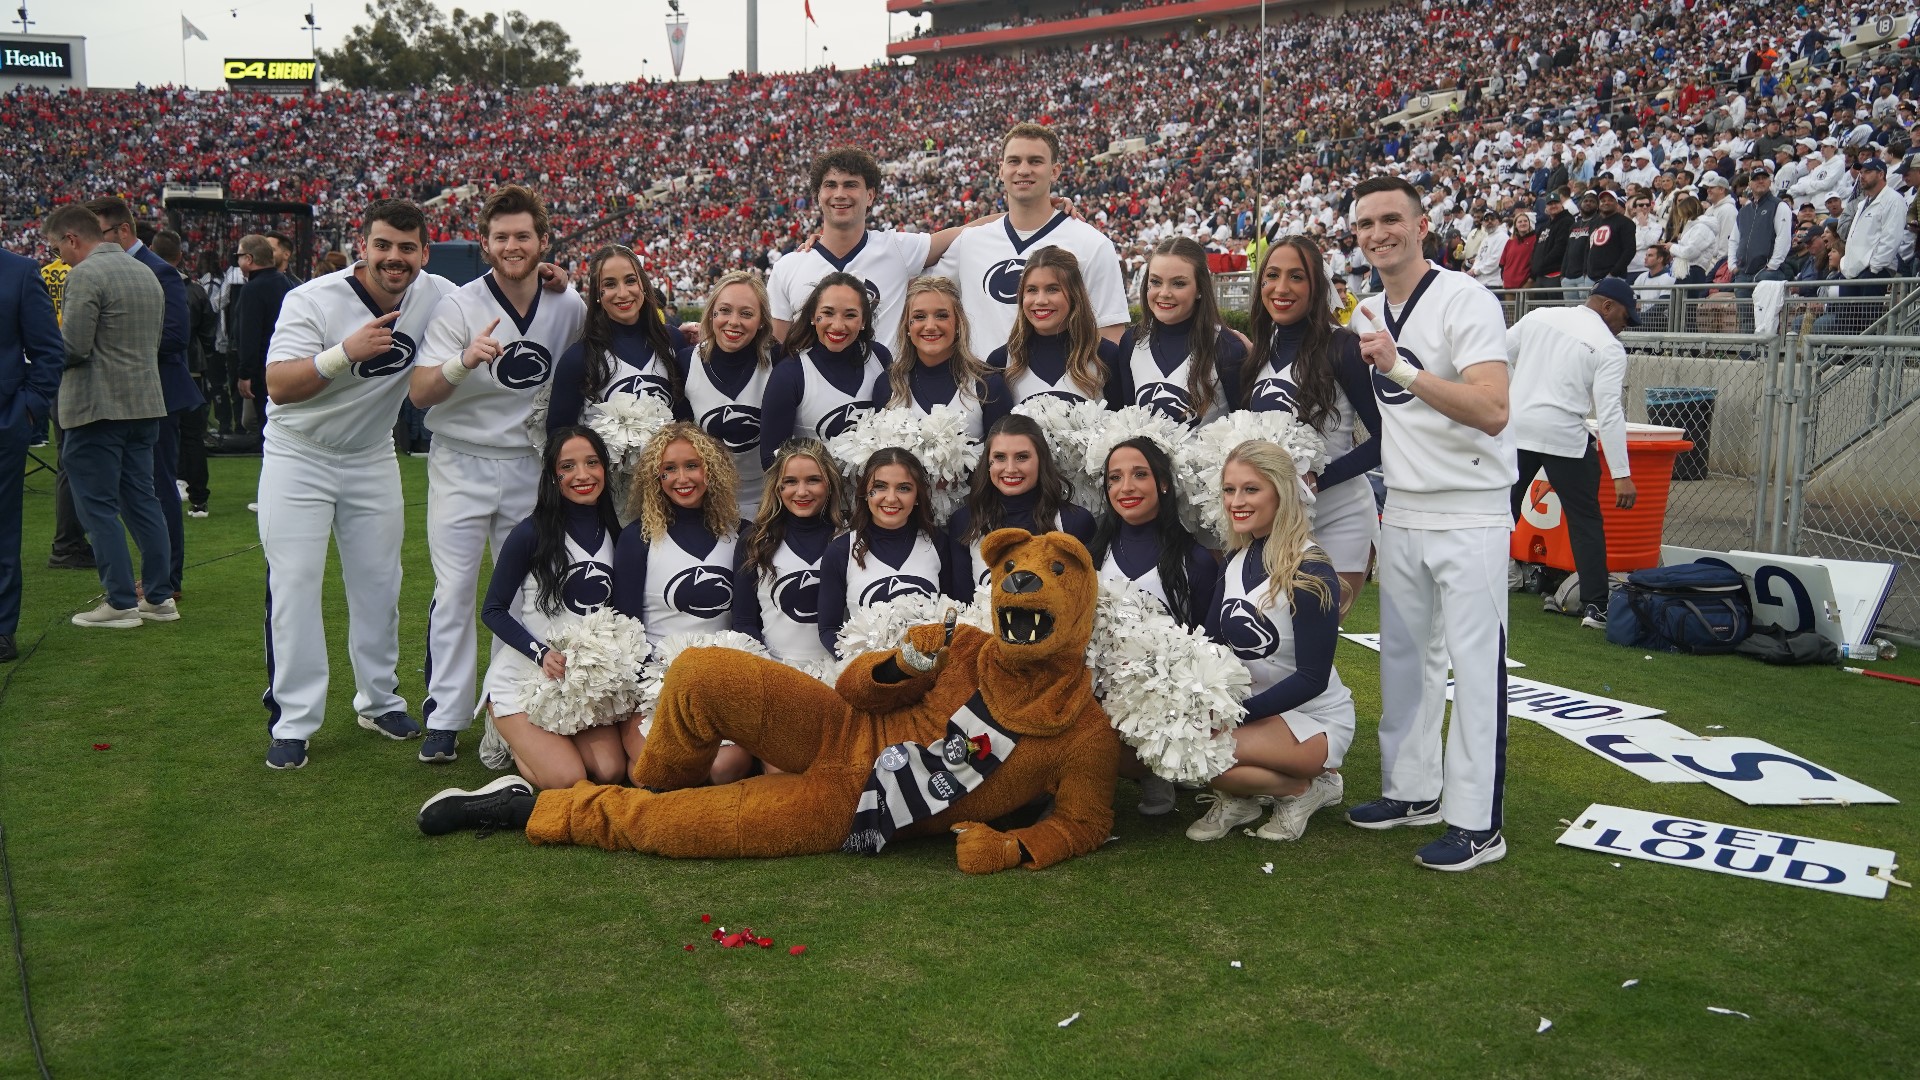 No. 9 Penn State rallied past No. 7 Utah 35-21 in the 109th edition of the Rose Bowl.